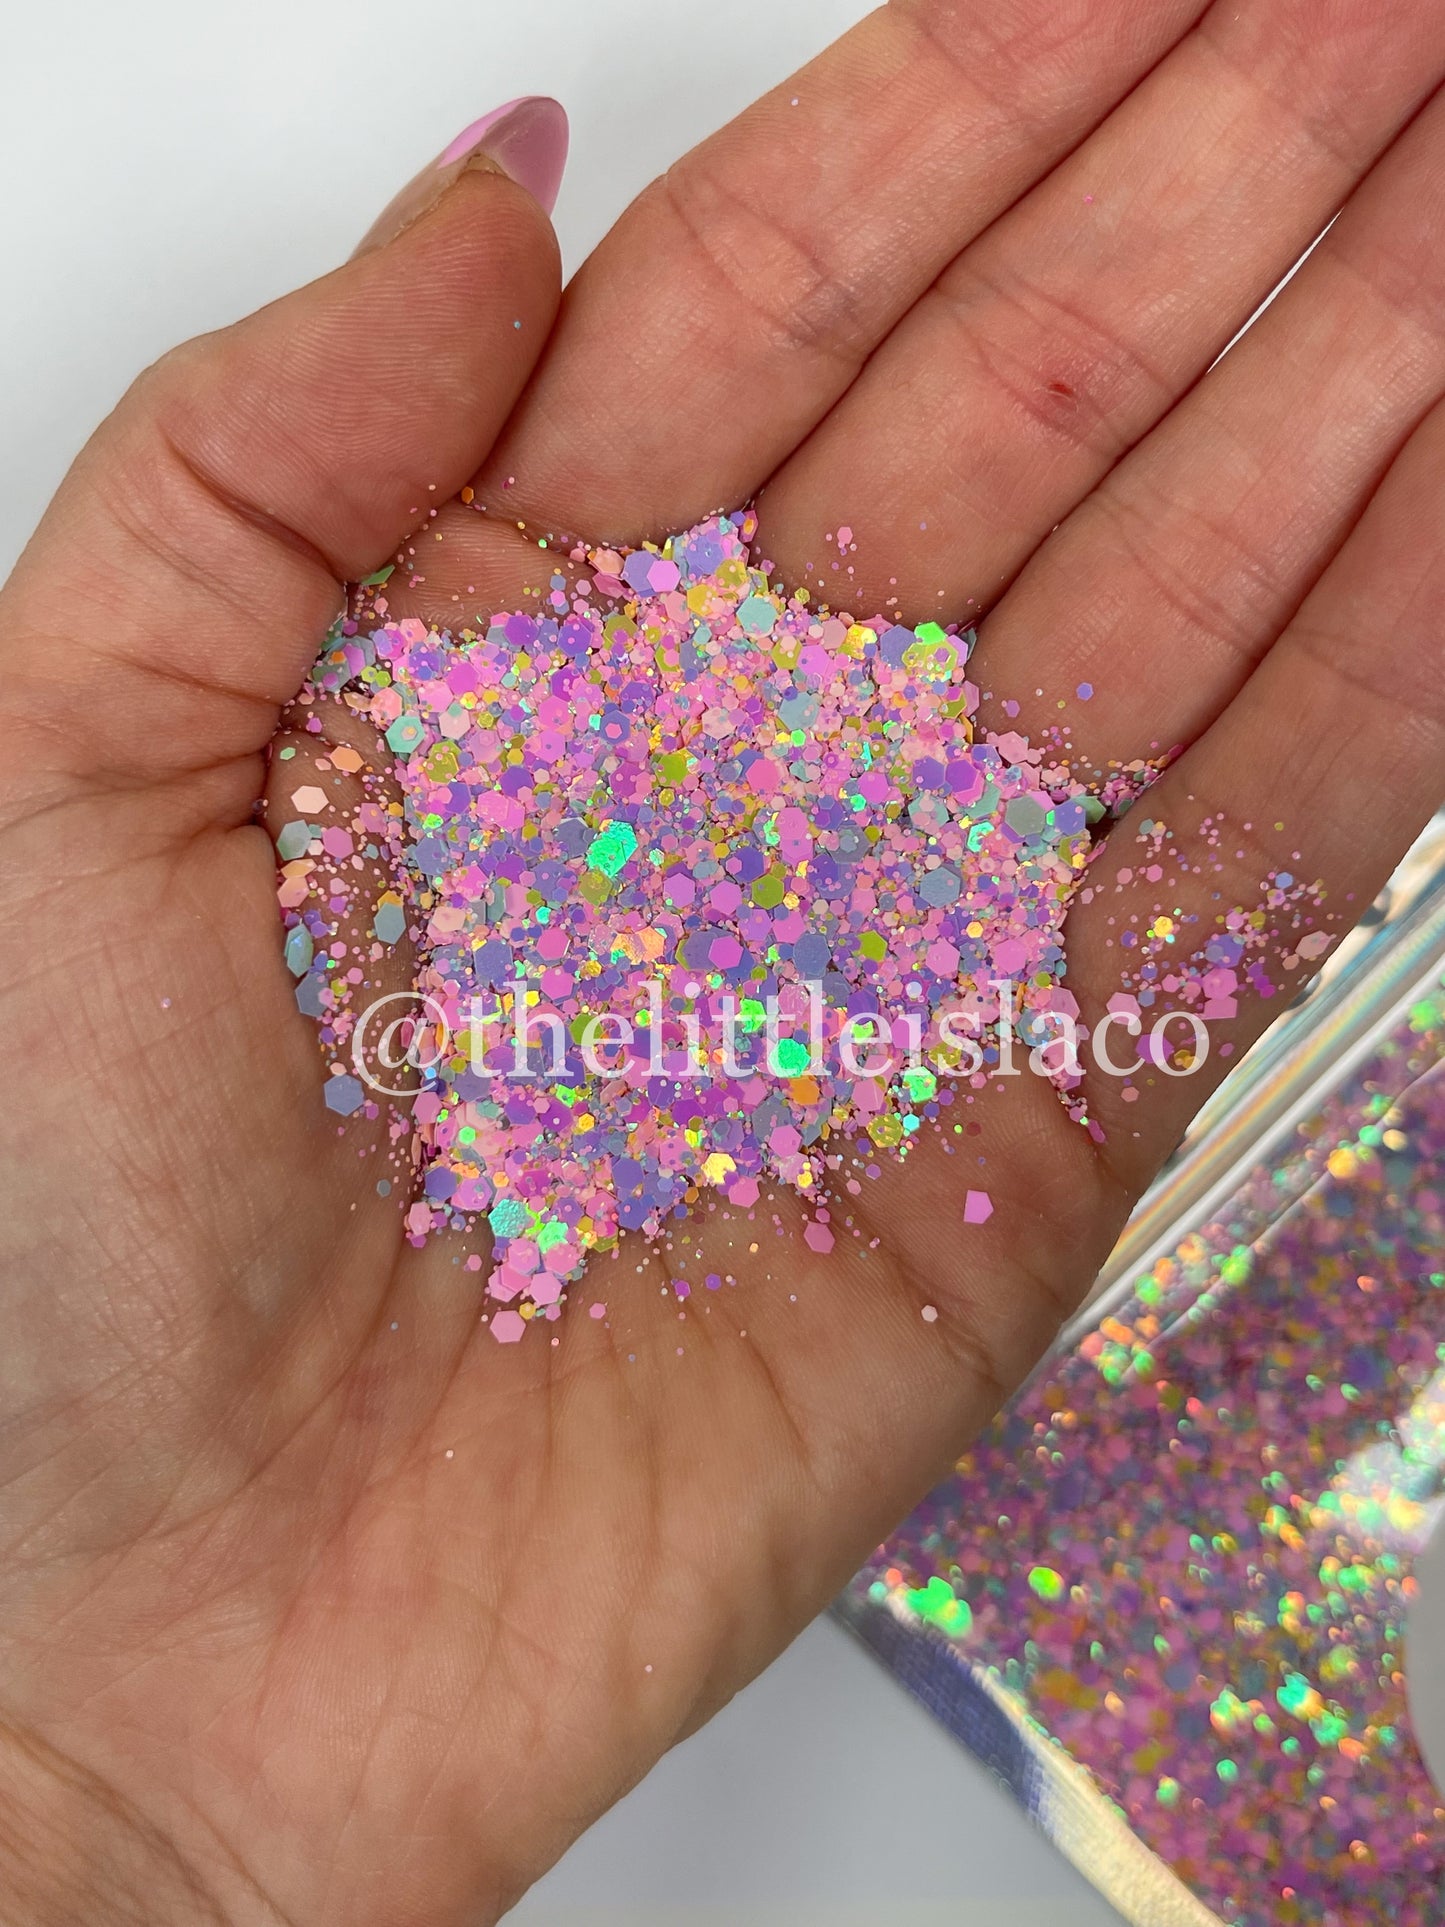 Chunky Glitter Mix - ‘Dolly Mixture’ - 50g Pack